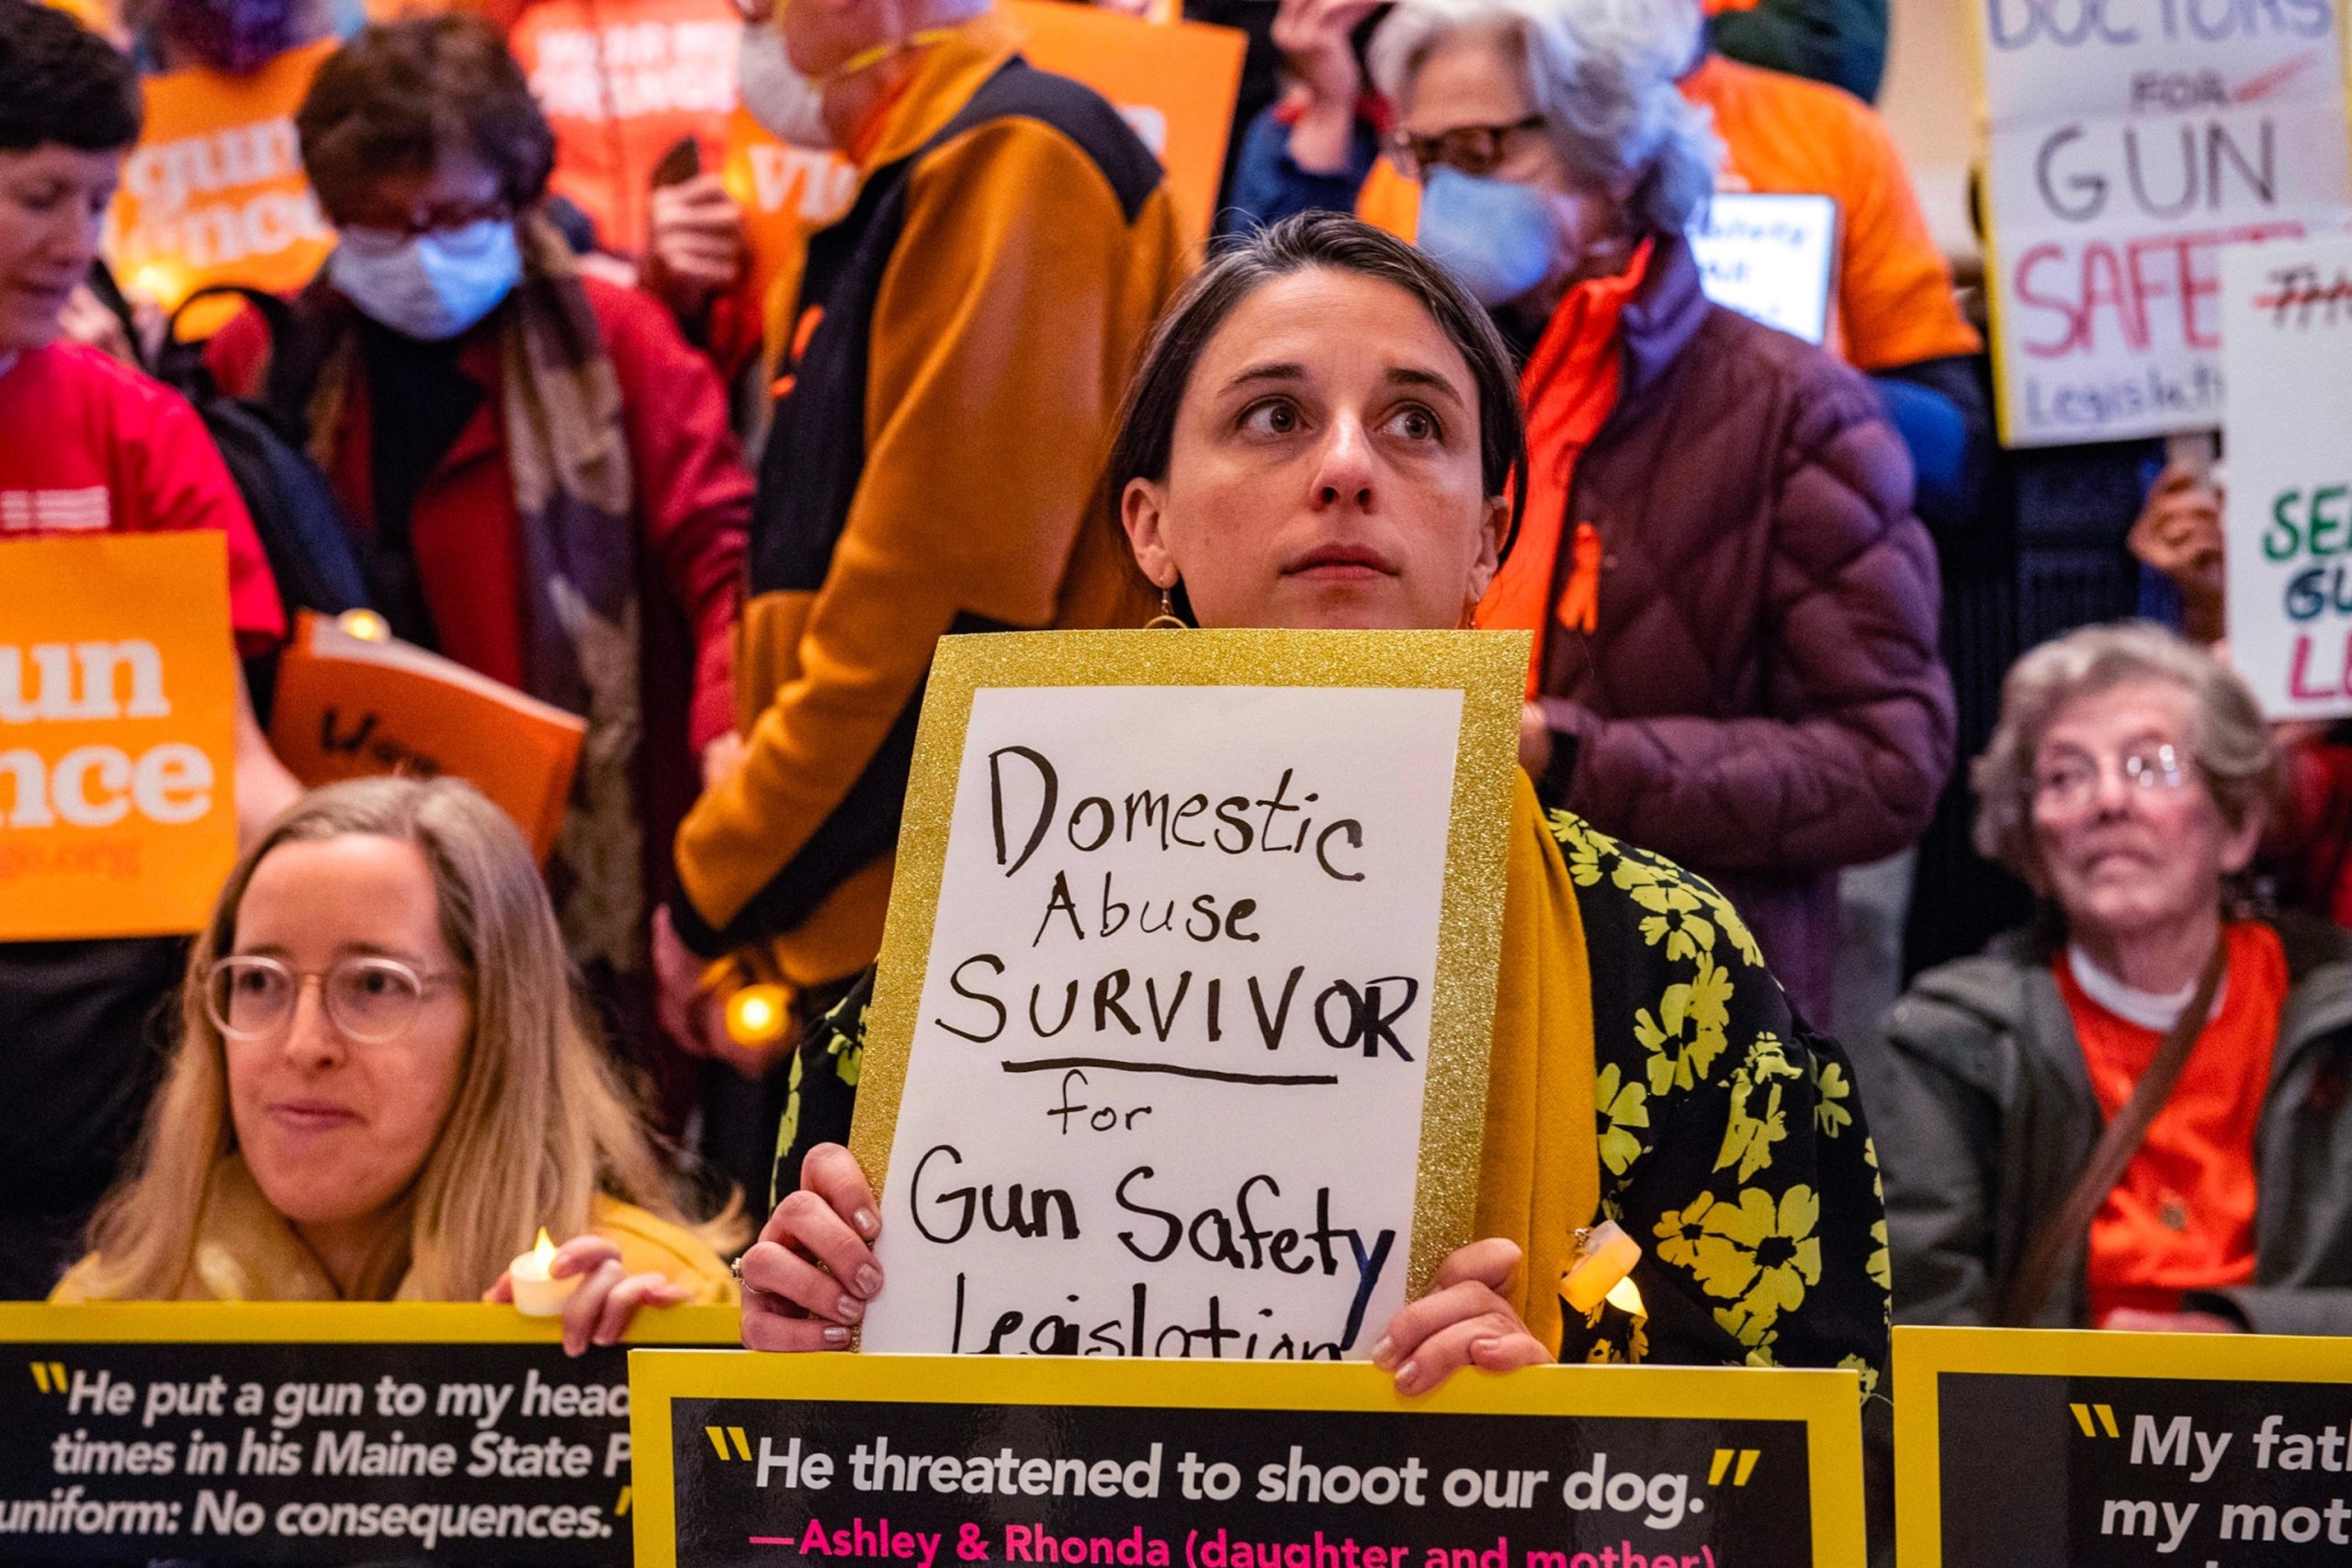 Supreme Court Upholds Gun Ban for Domestic Abusers, Applauded by Gun Control Groups